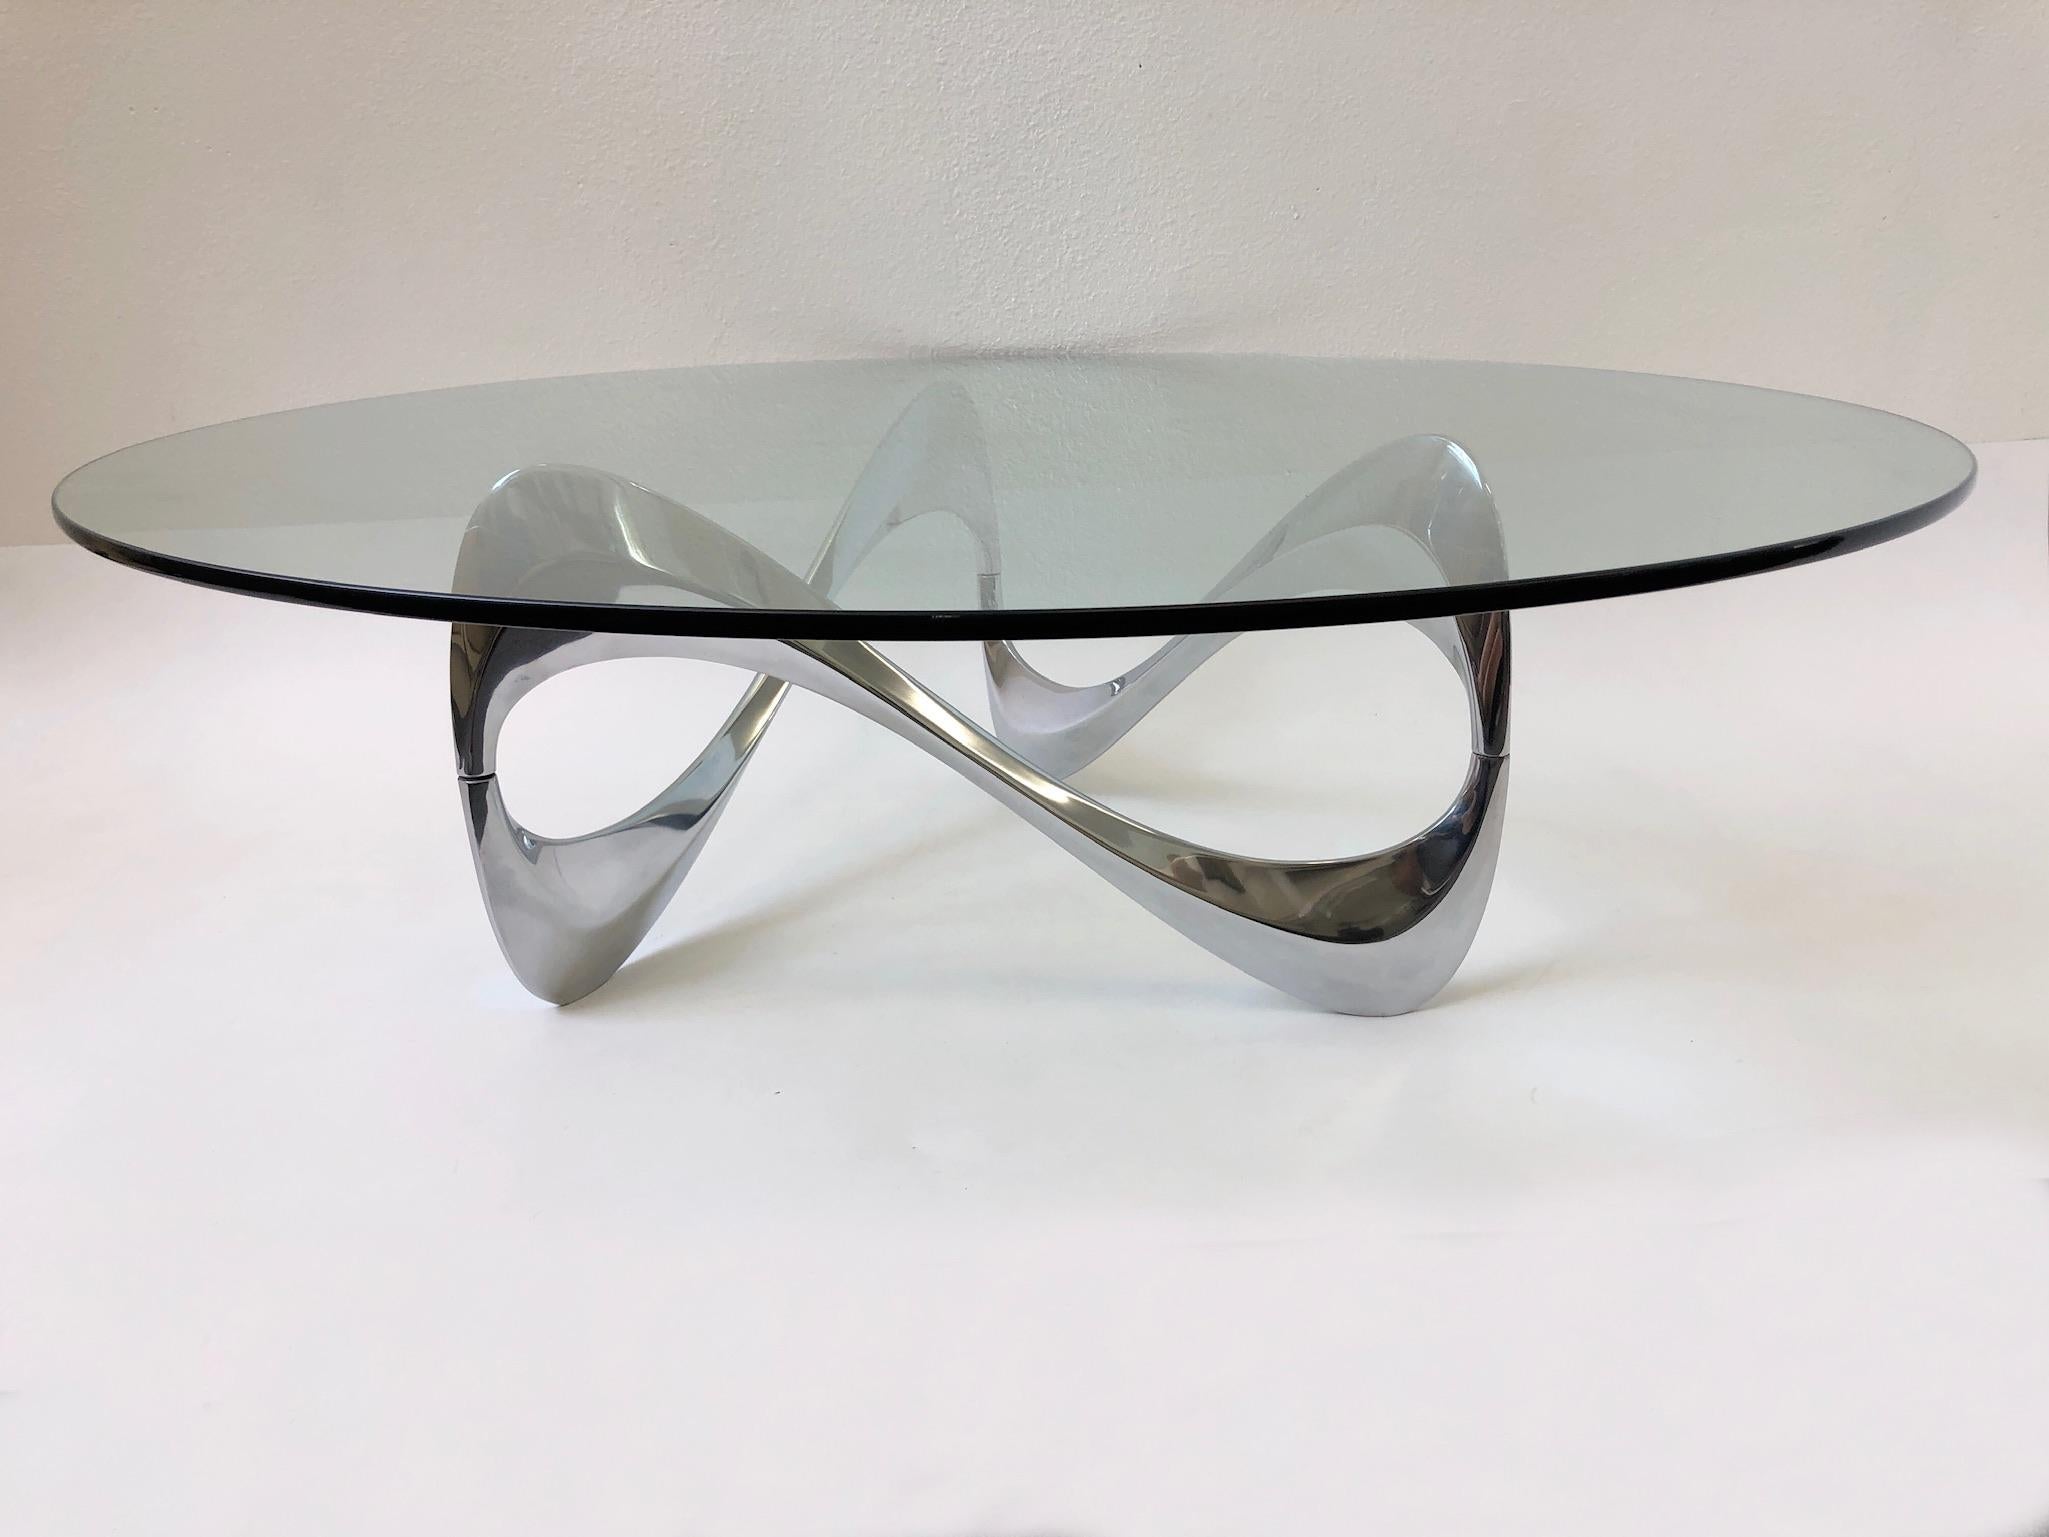 German Polish Aluminum and Glass Cocktail Table by Knut Hesterberg For Sale